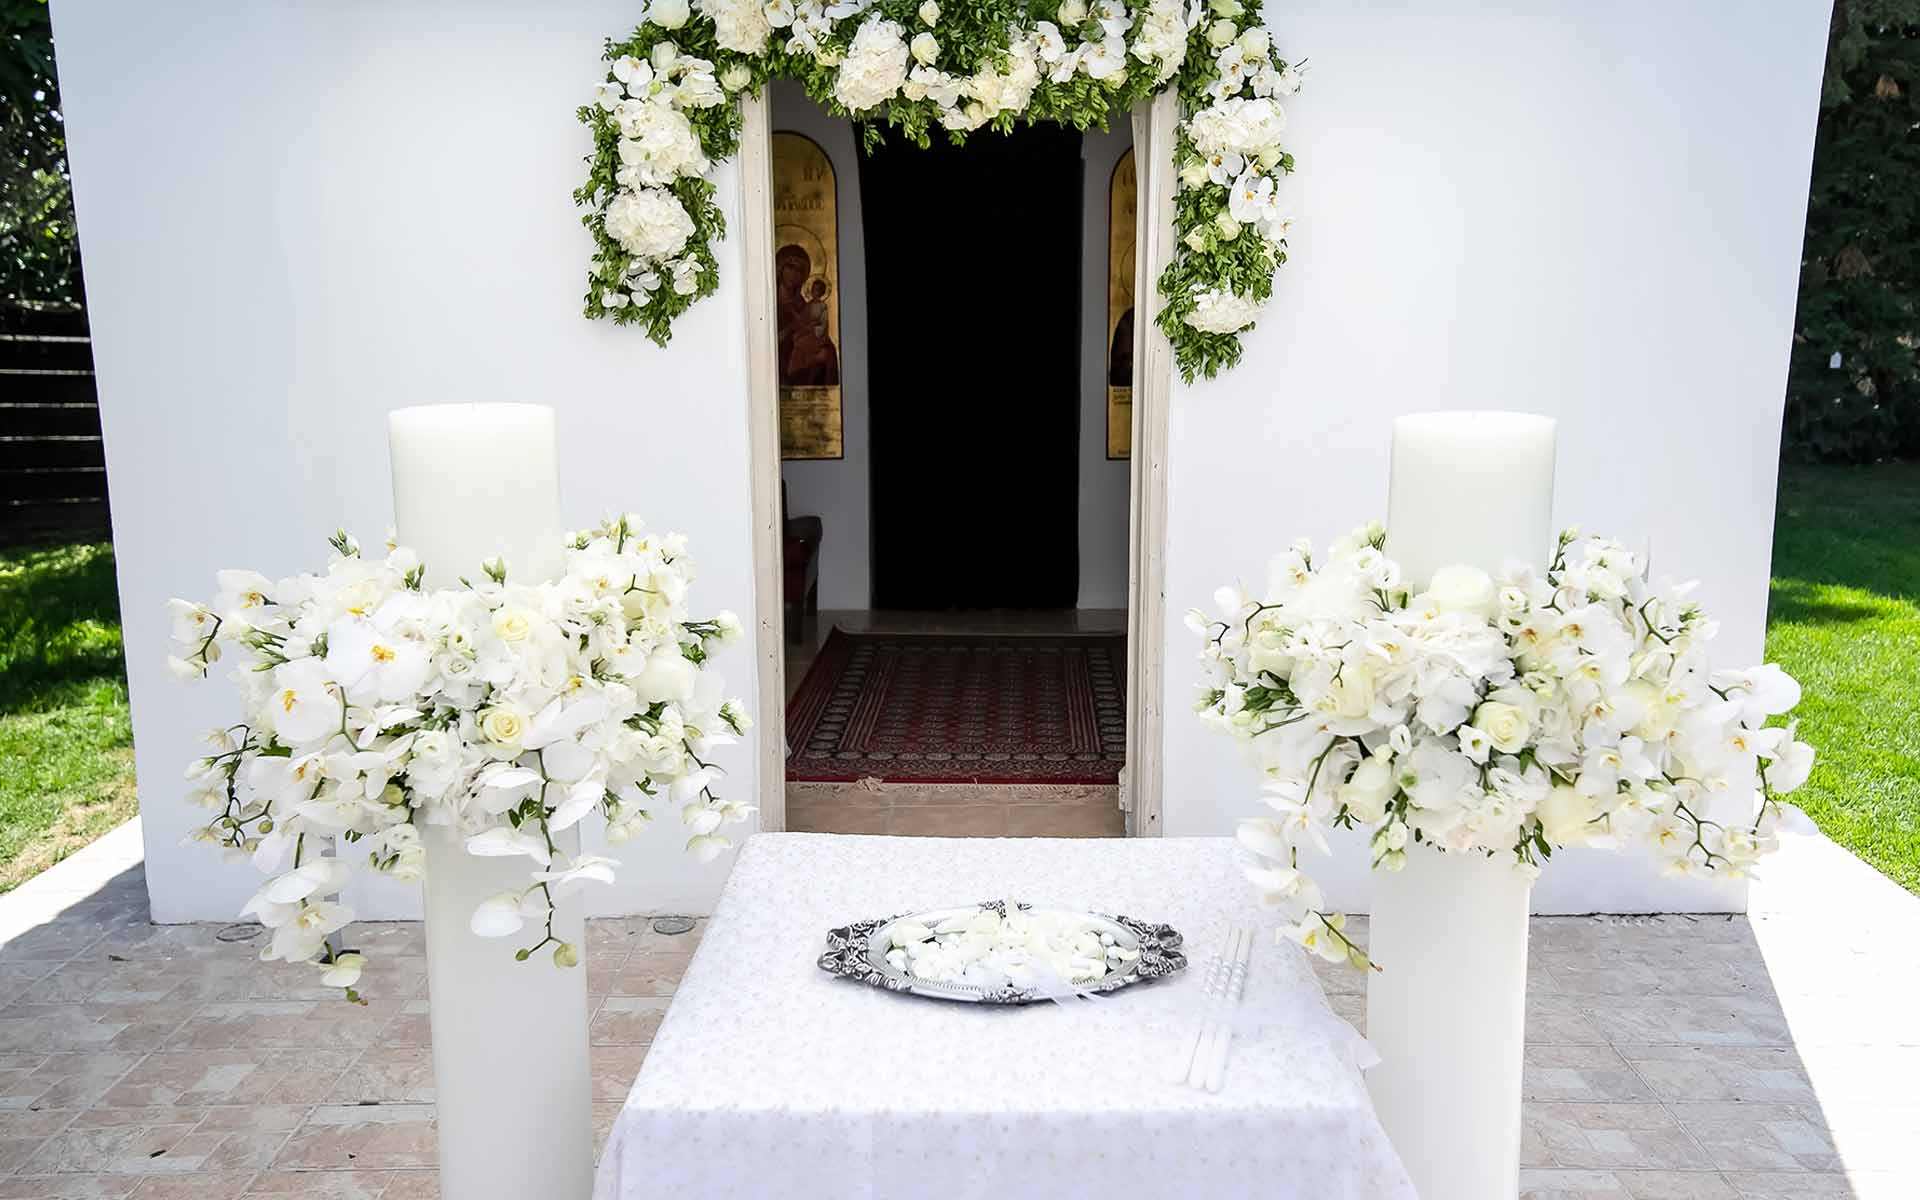 Unity-candle-set-with-Orchids-hydrangeas-and-roses-all-in-white-for-an-Orthodox-ceremony